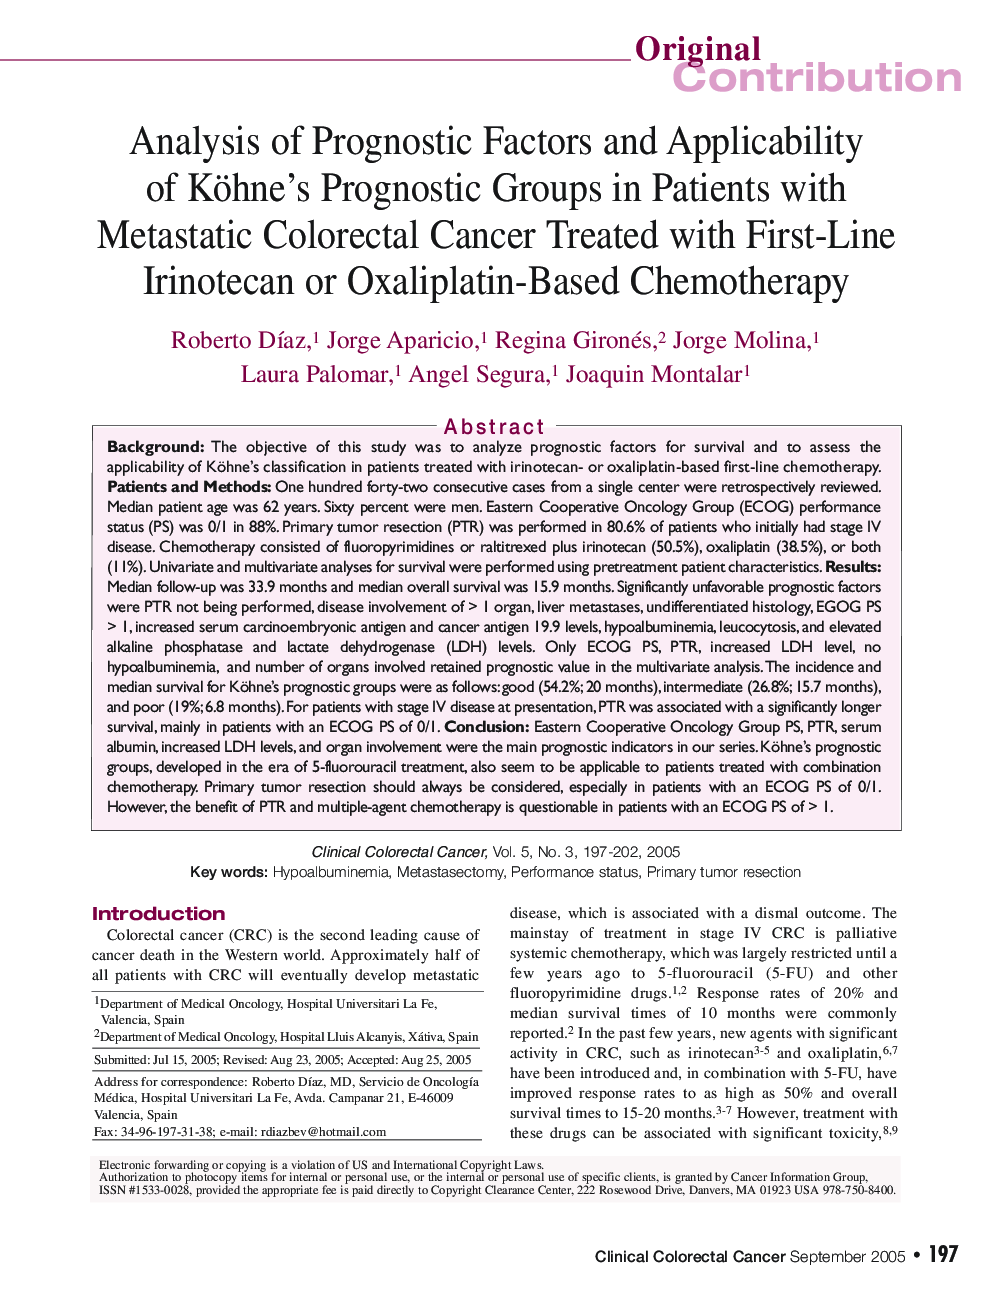 Analysis of Prognostic Factors and Applicability of Köhne's Prognostic Groups in Patients with Metastatic Colorectal Cancer Treated with First-Line Irinotecan or Oxaliplatin-Based Chemotherapy